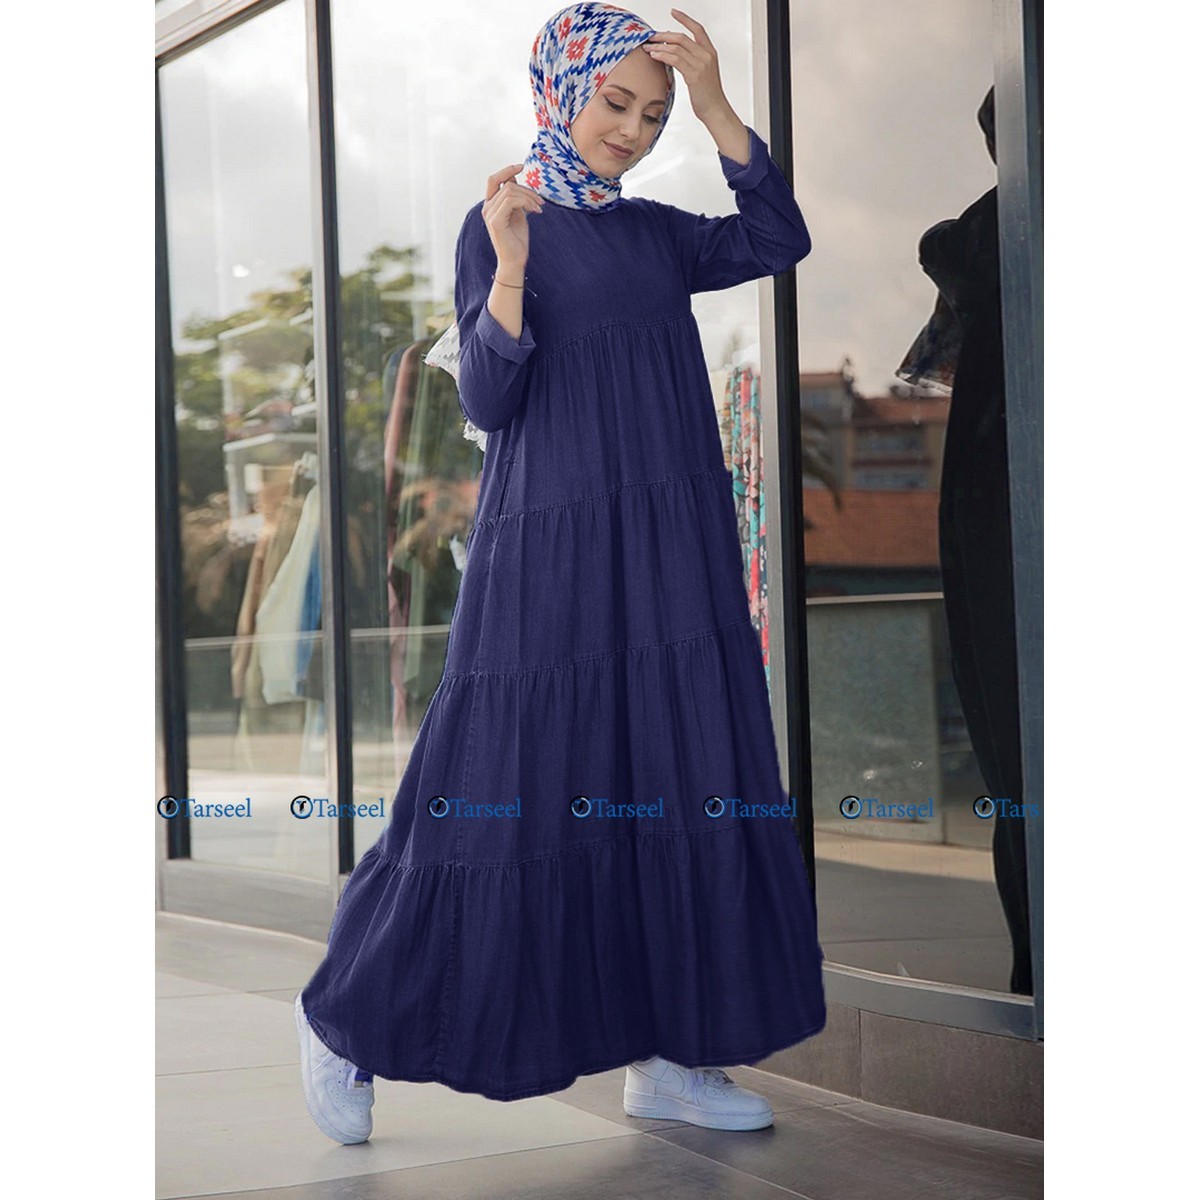 Abayas: Find Open Closed Women's Abayas for Sale Online | AbayaButh | Abayas  fashion, Muslim fashion outfits, Work outfits women